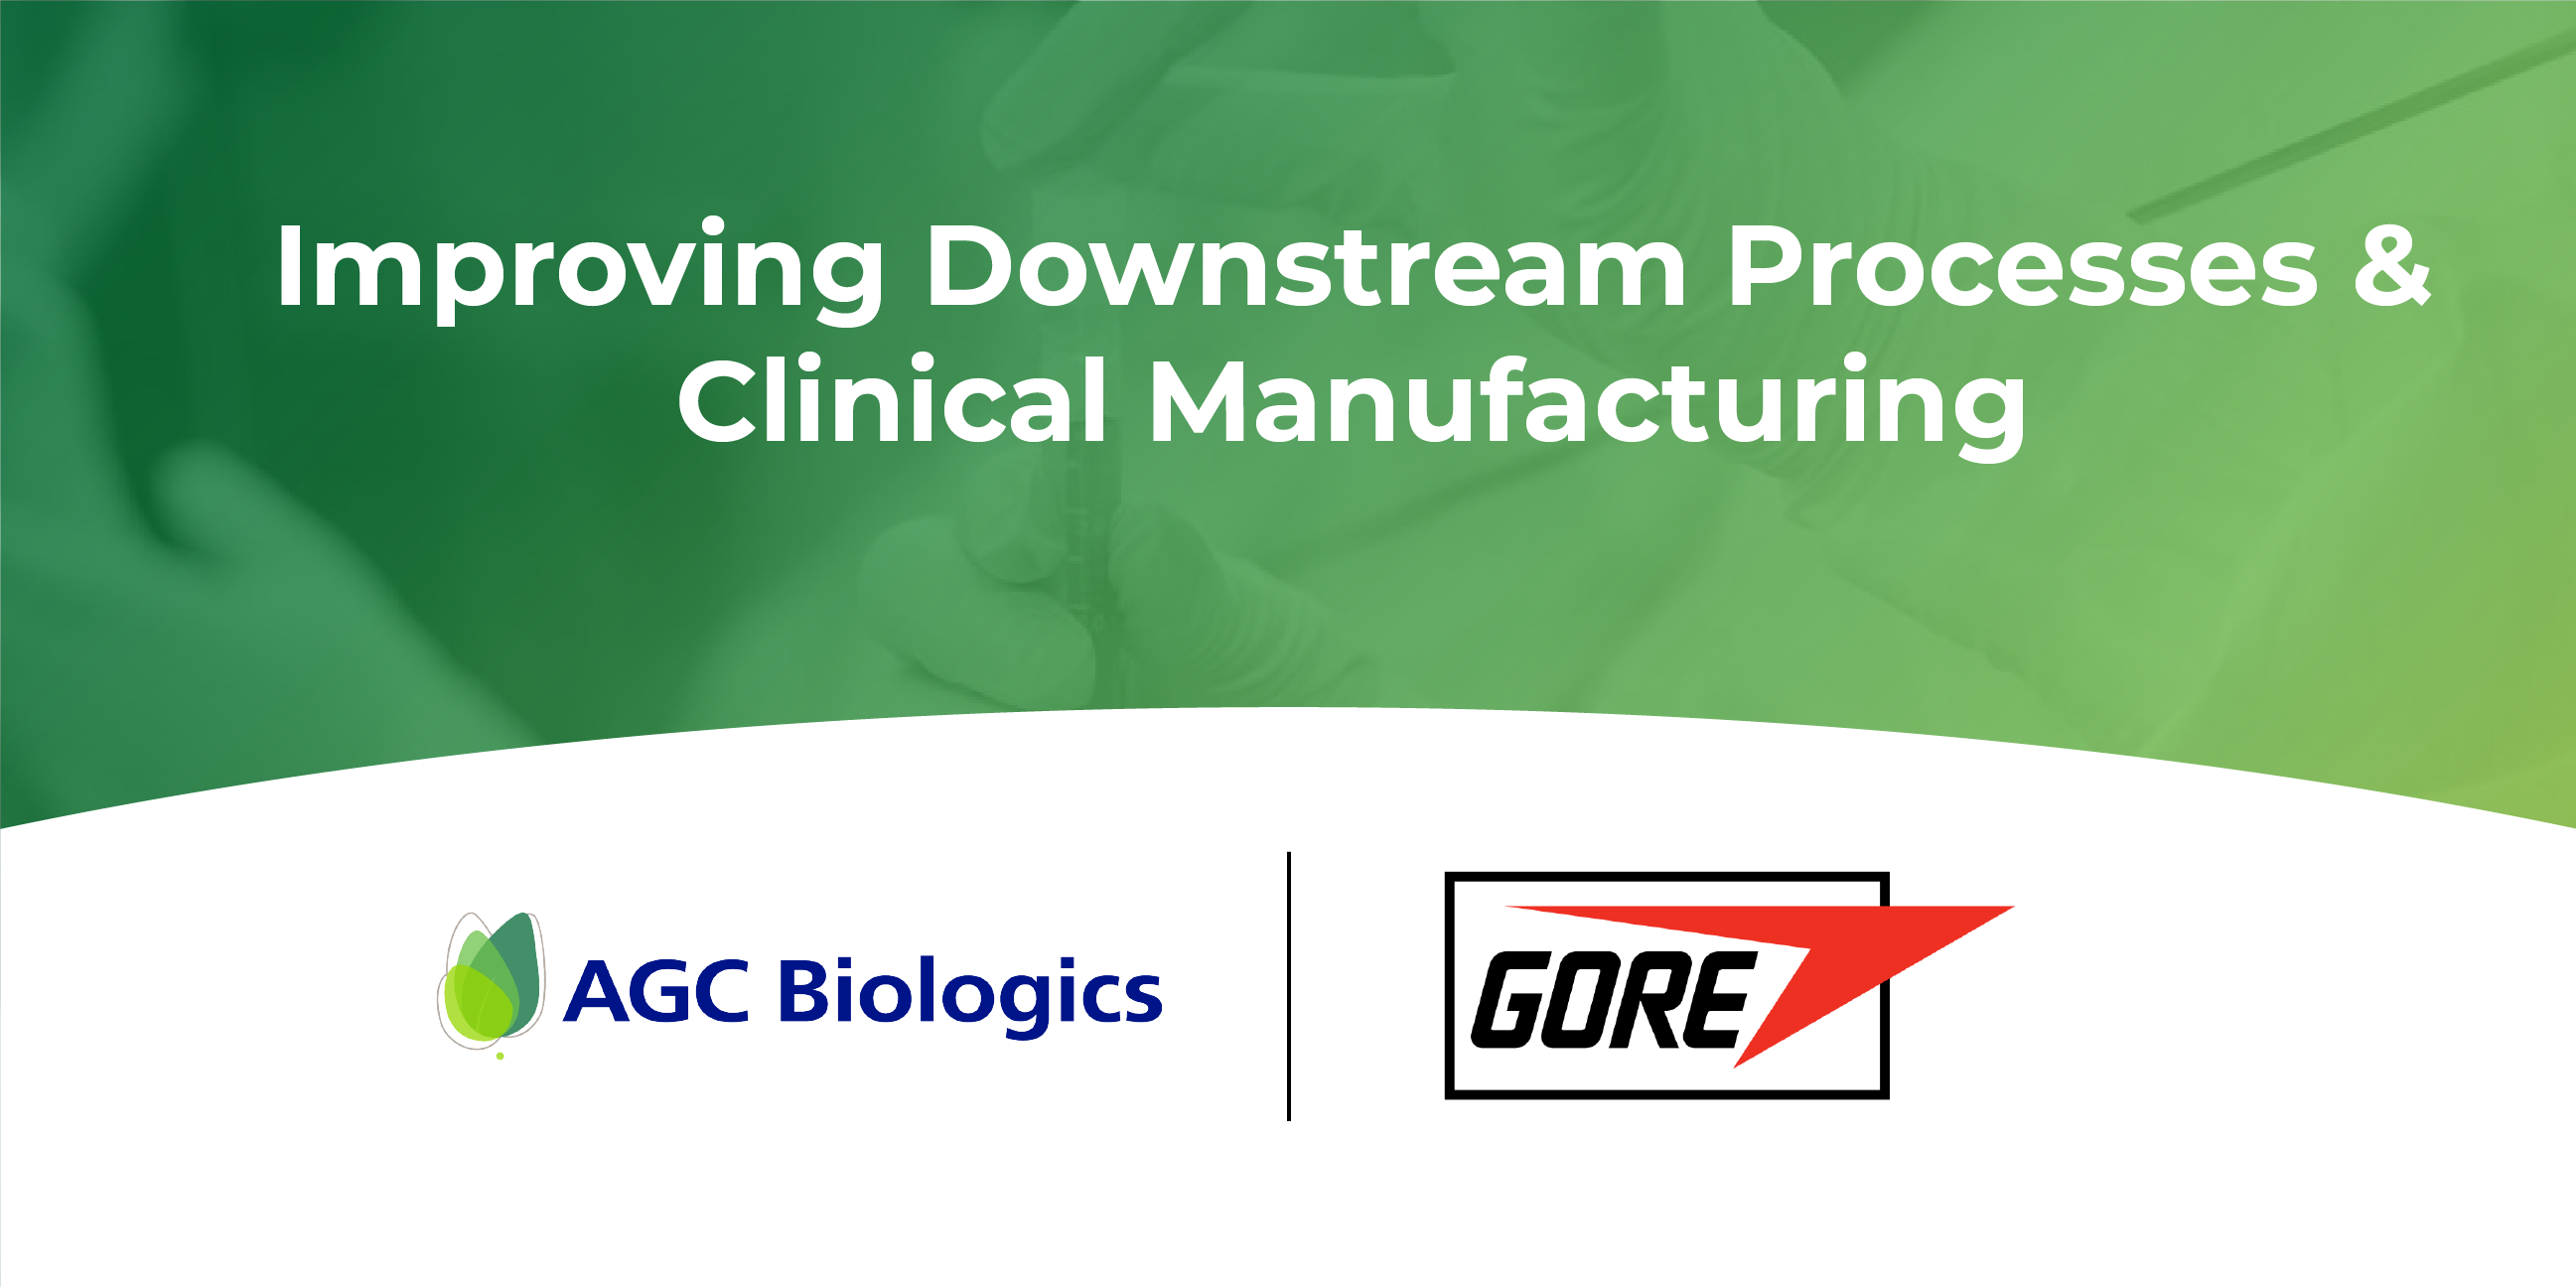 Improving downstream processes & Clinical Manufacturing with GORE